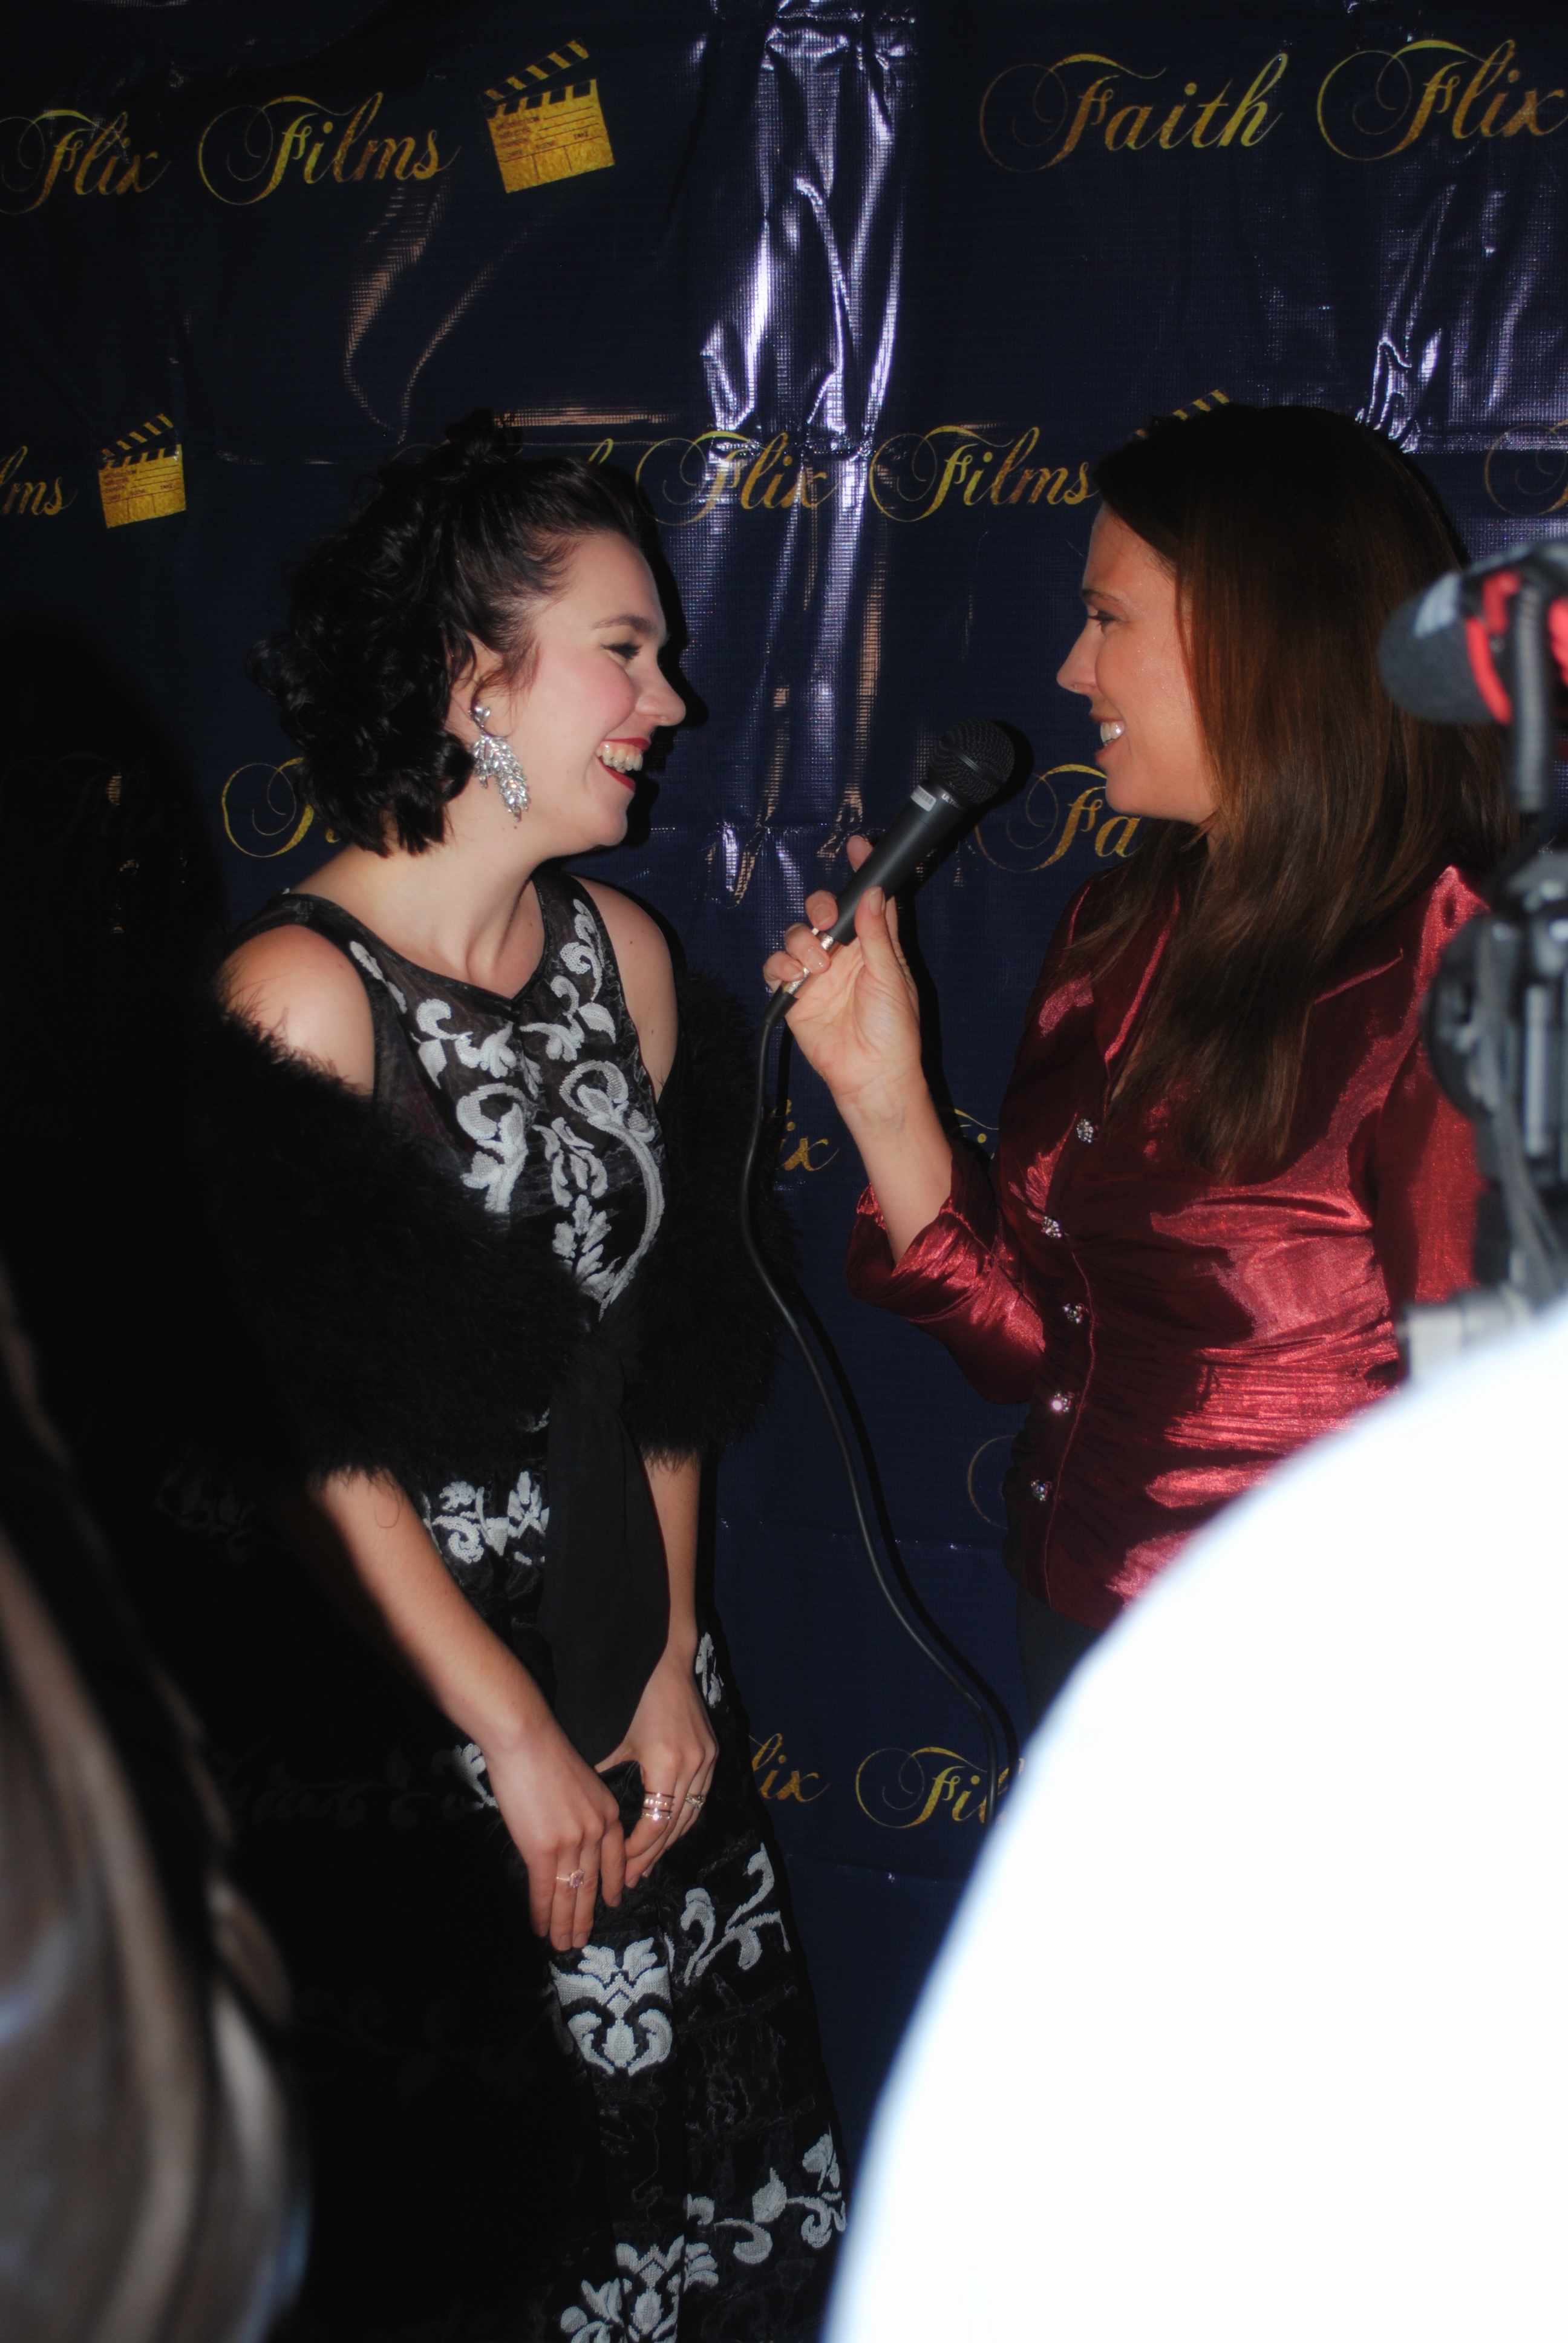 Being interviewed on the Red Carpet by Mary Meyer, Music City Corner, at the Nashville Premiere of Providence.